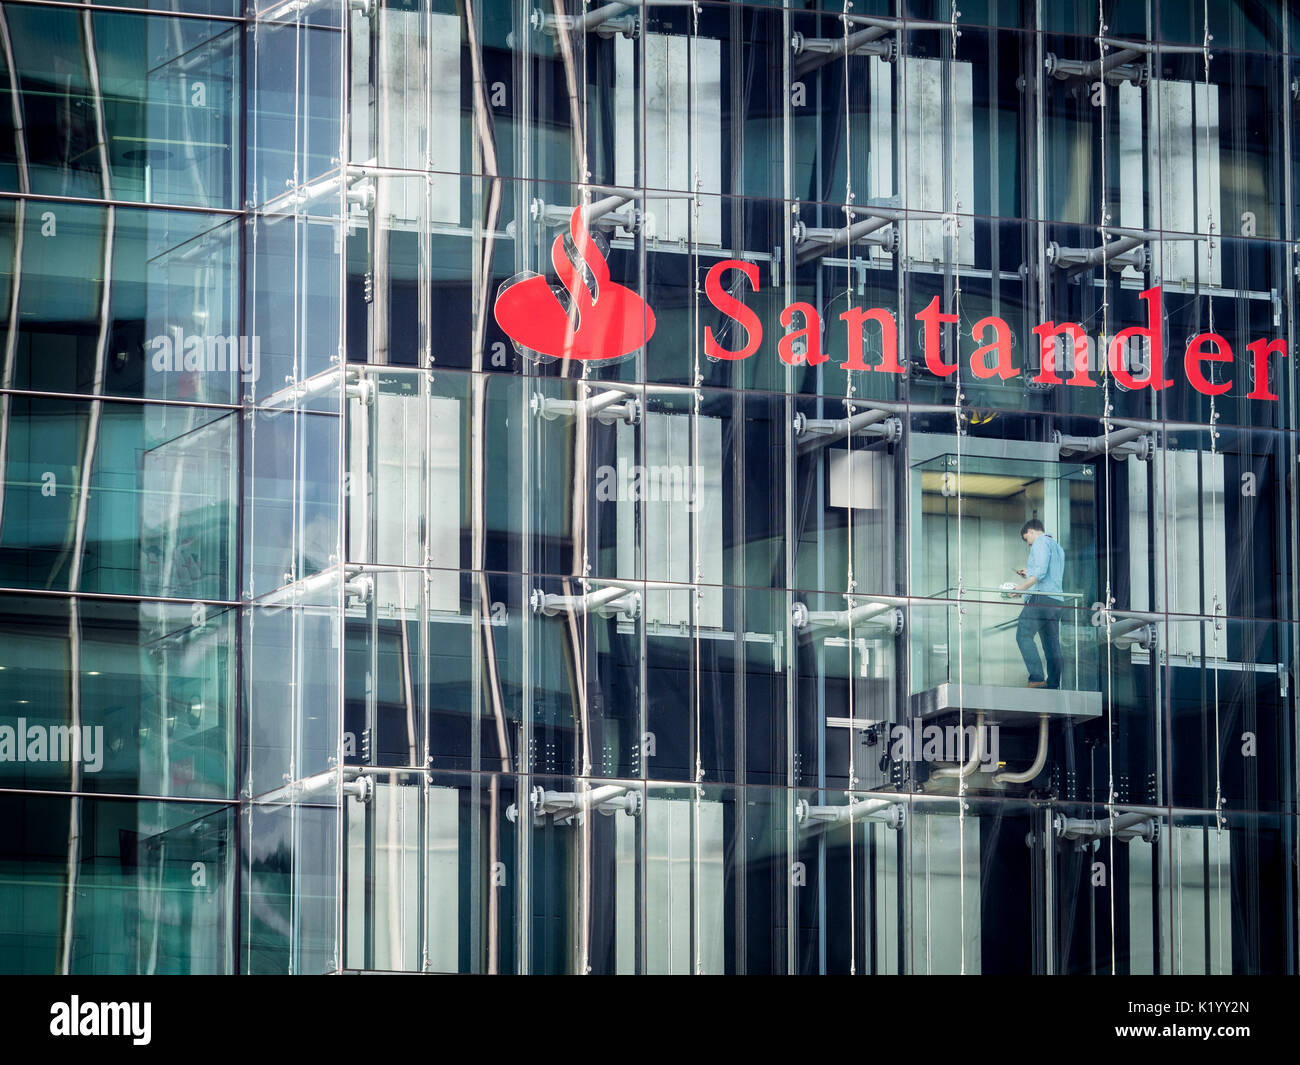 Santander Bank Triton Square offices in central London UK Stock Photo